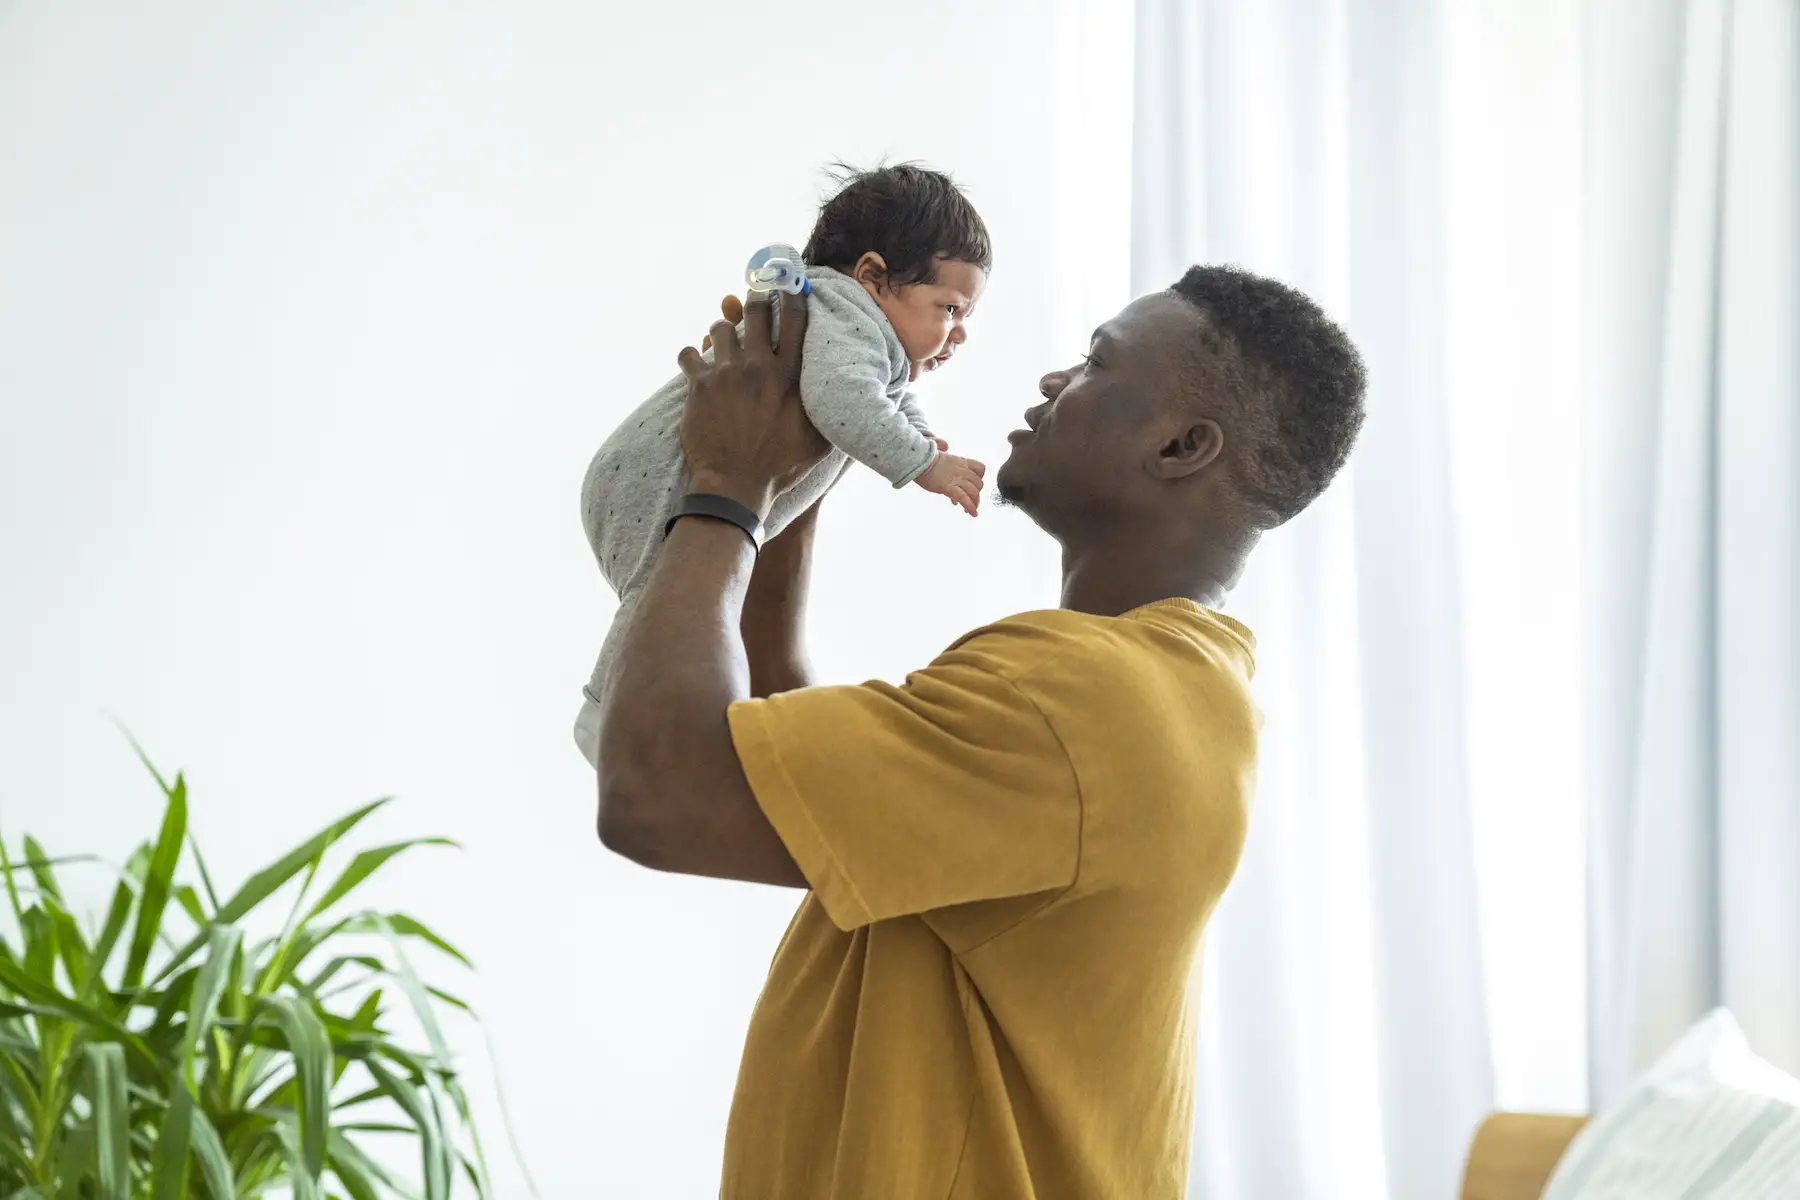 A father plays with his newborn baby boy, lifting him up to eye level in a brightly lit room.